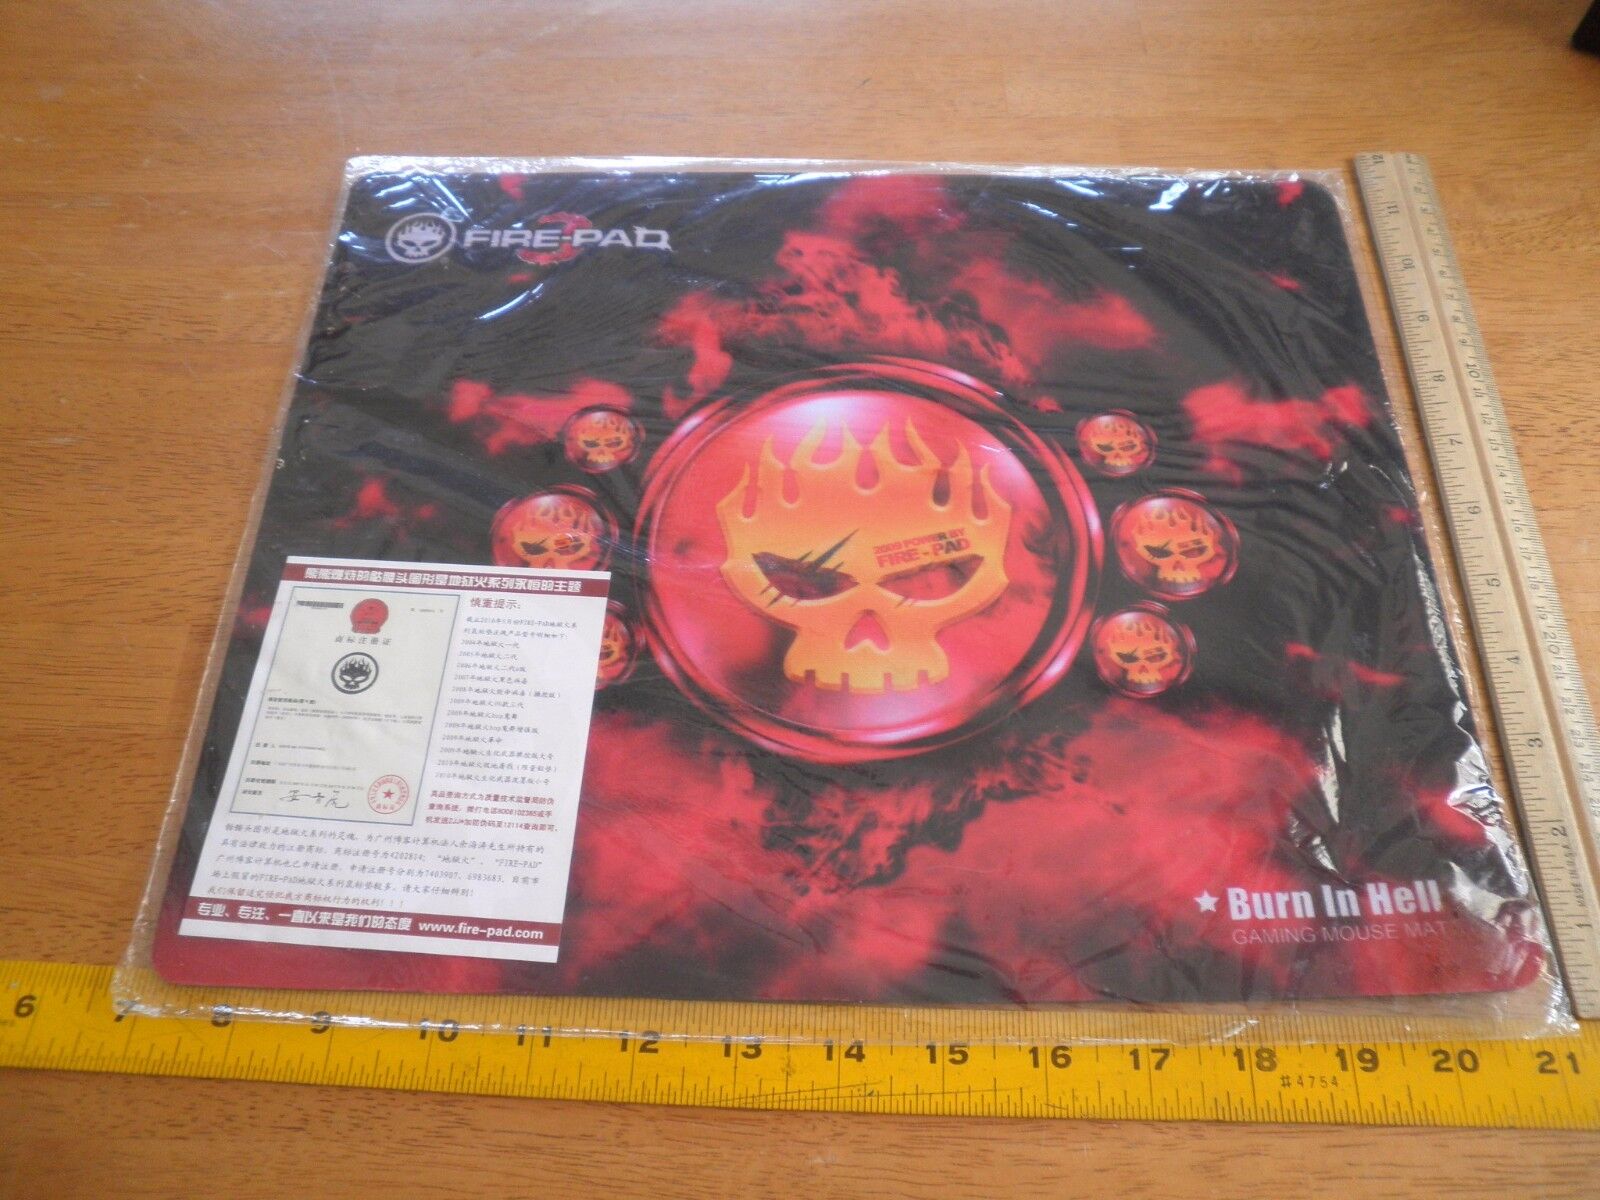 2009 Fire-Pad Burn in Hell Gaming Mouse Mat MIP XL 